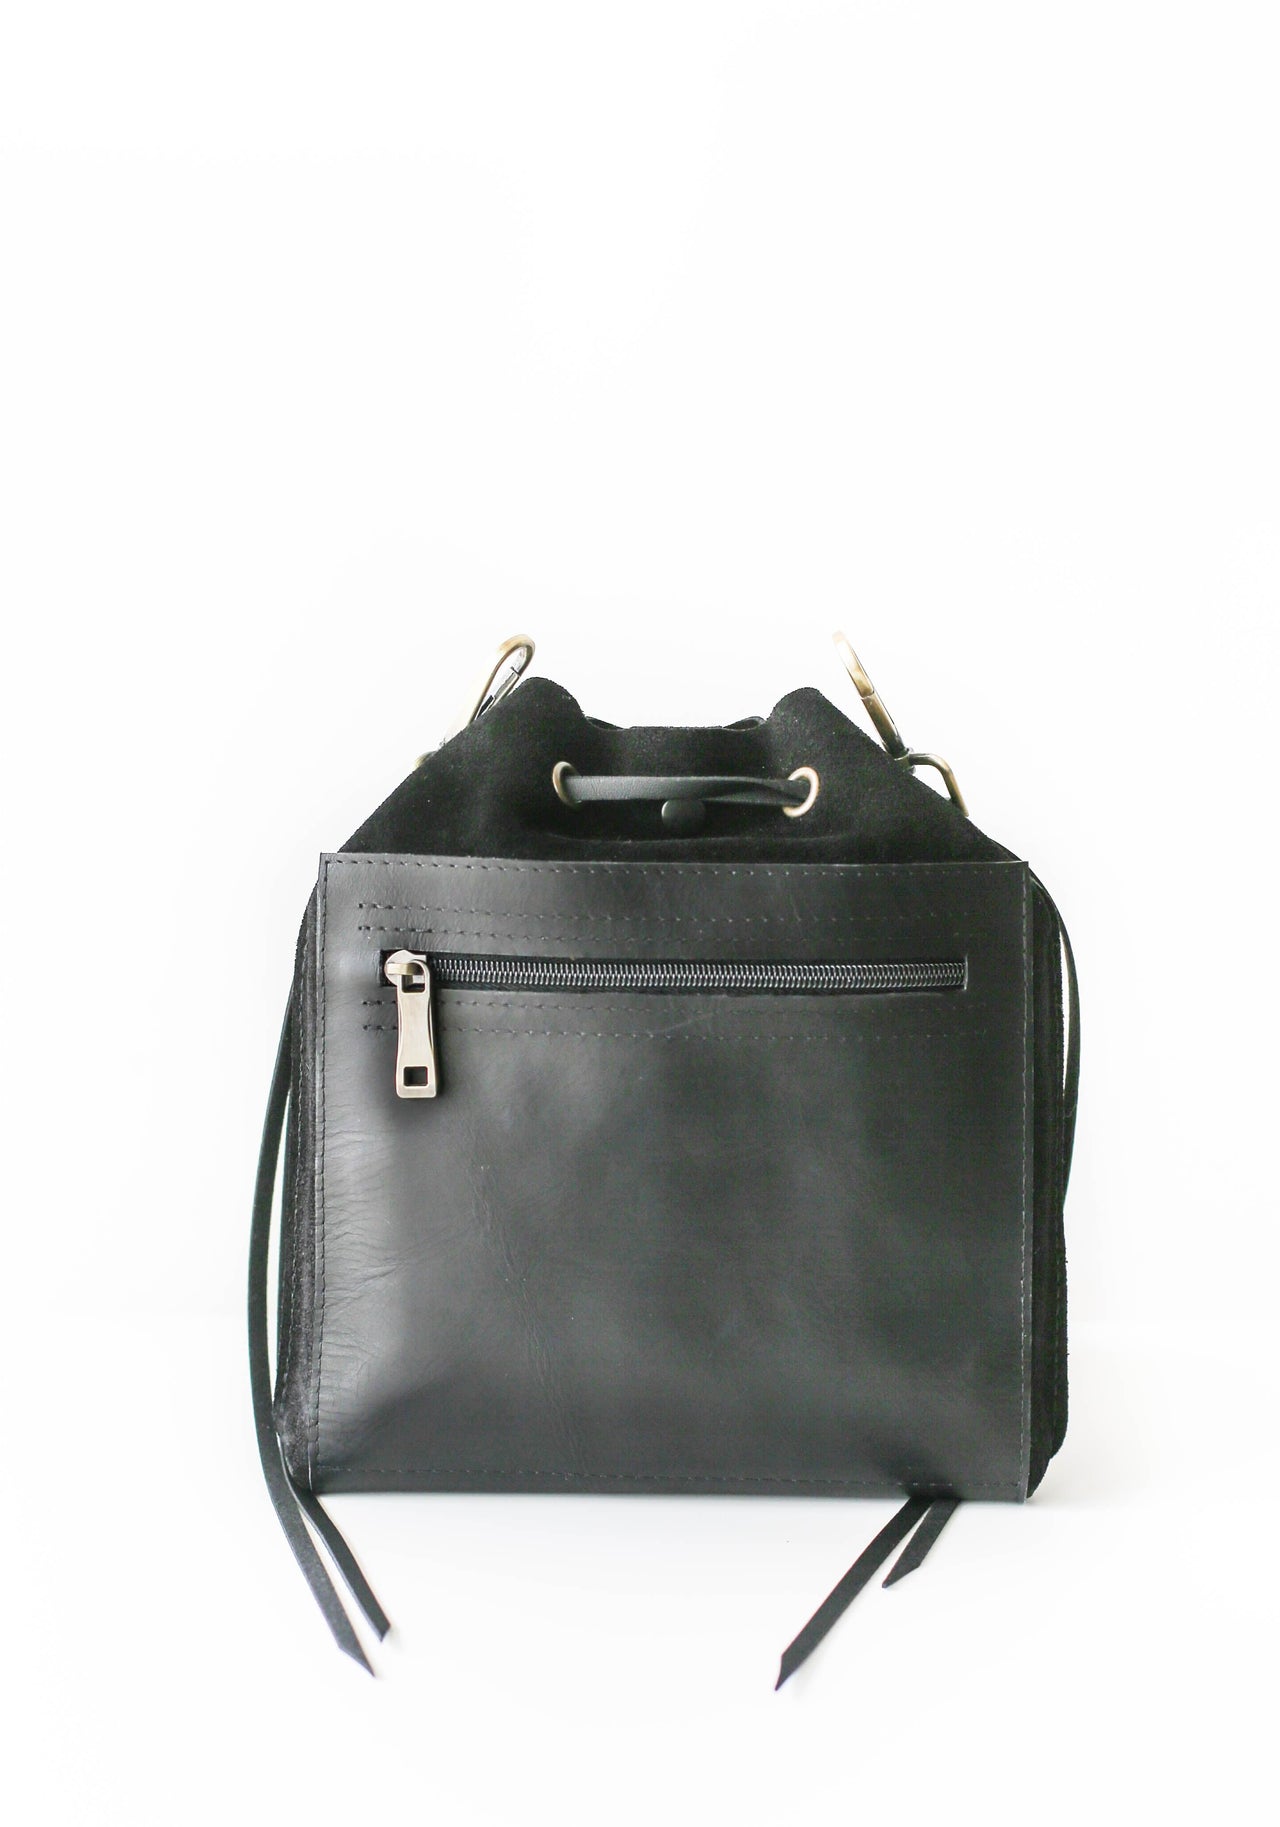 small black leather bag